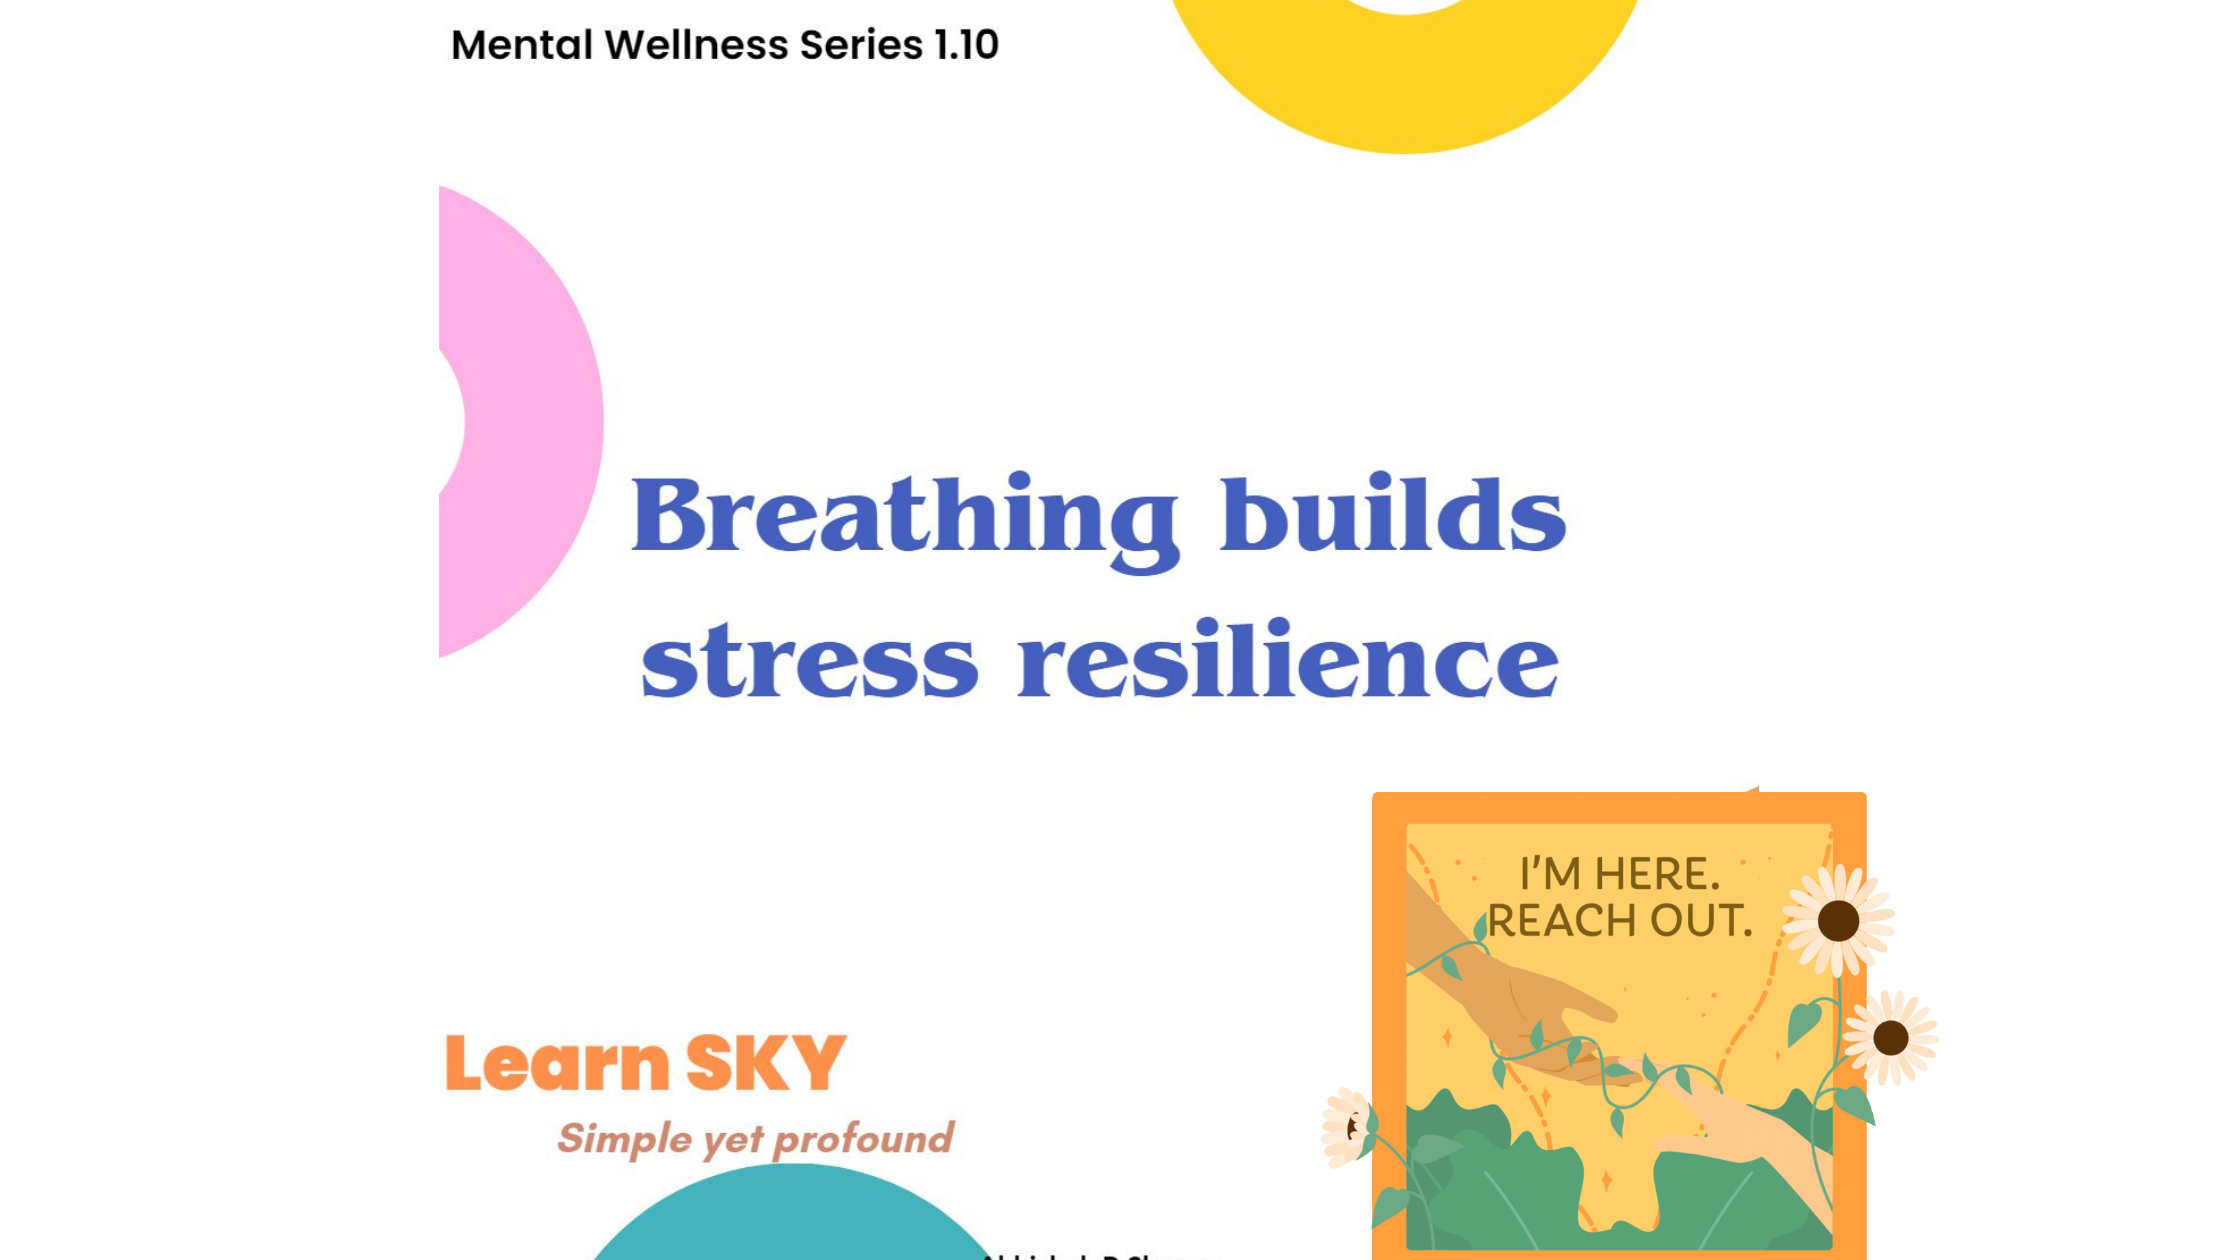 How can I Build Resilience using the Power of Breathing?